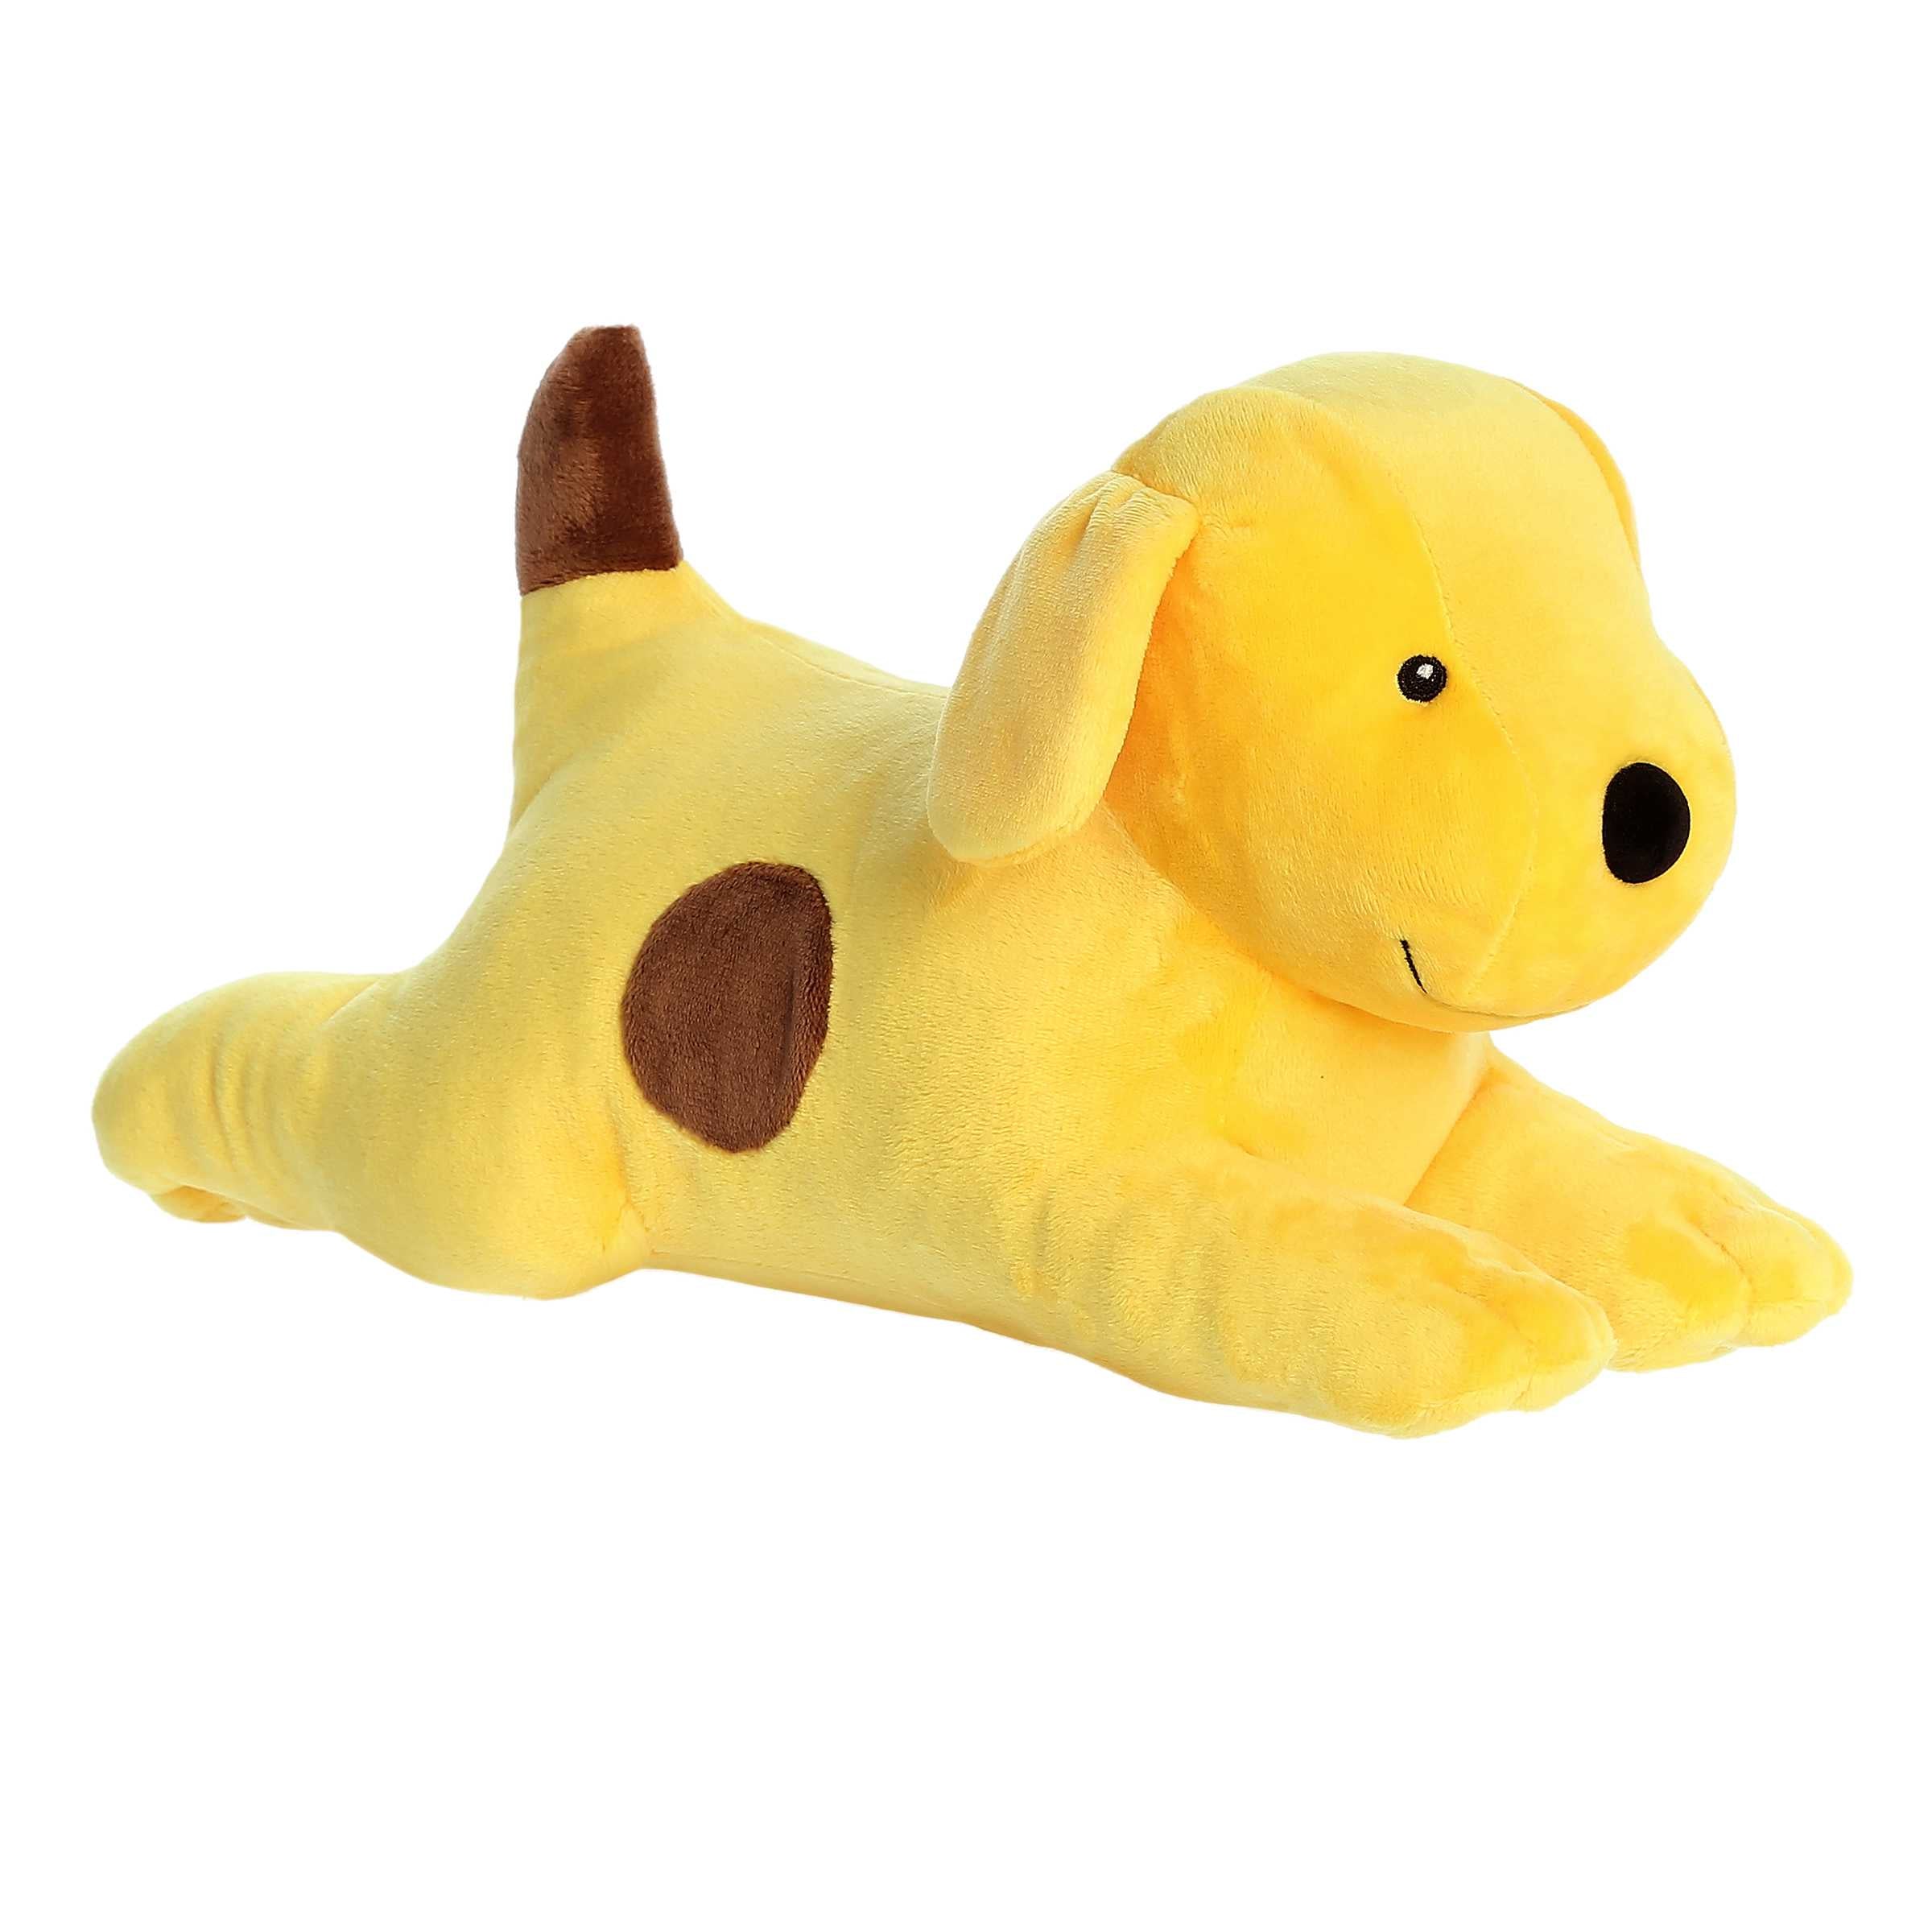 Sunny yellow Spot plush by Aurora, showcasing his iconic caramel spot and tail with a playful brown splash